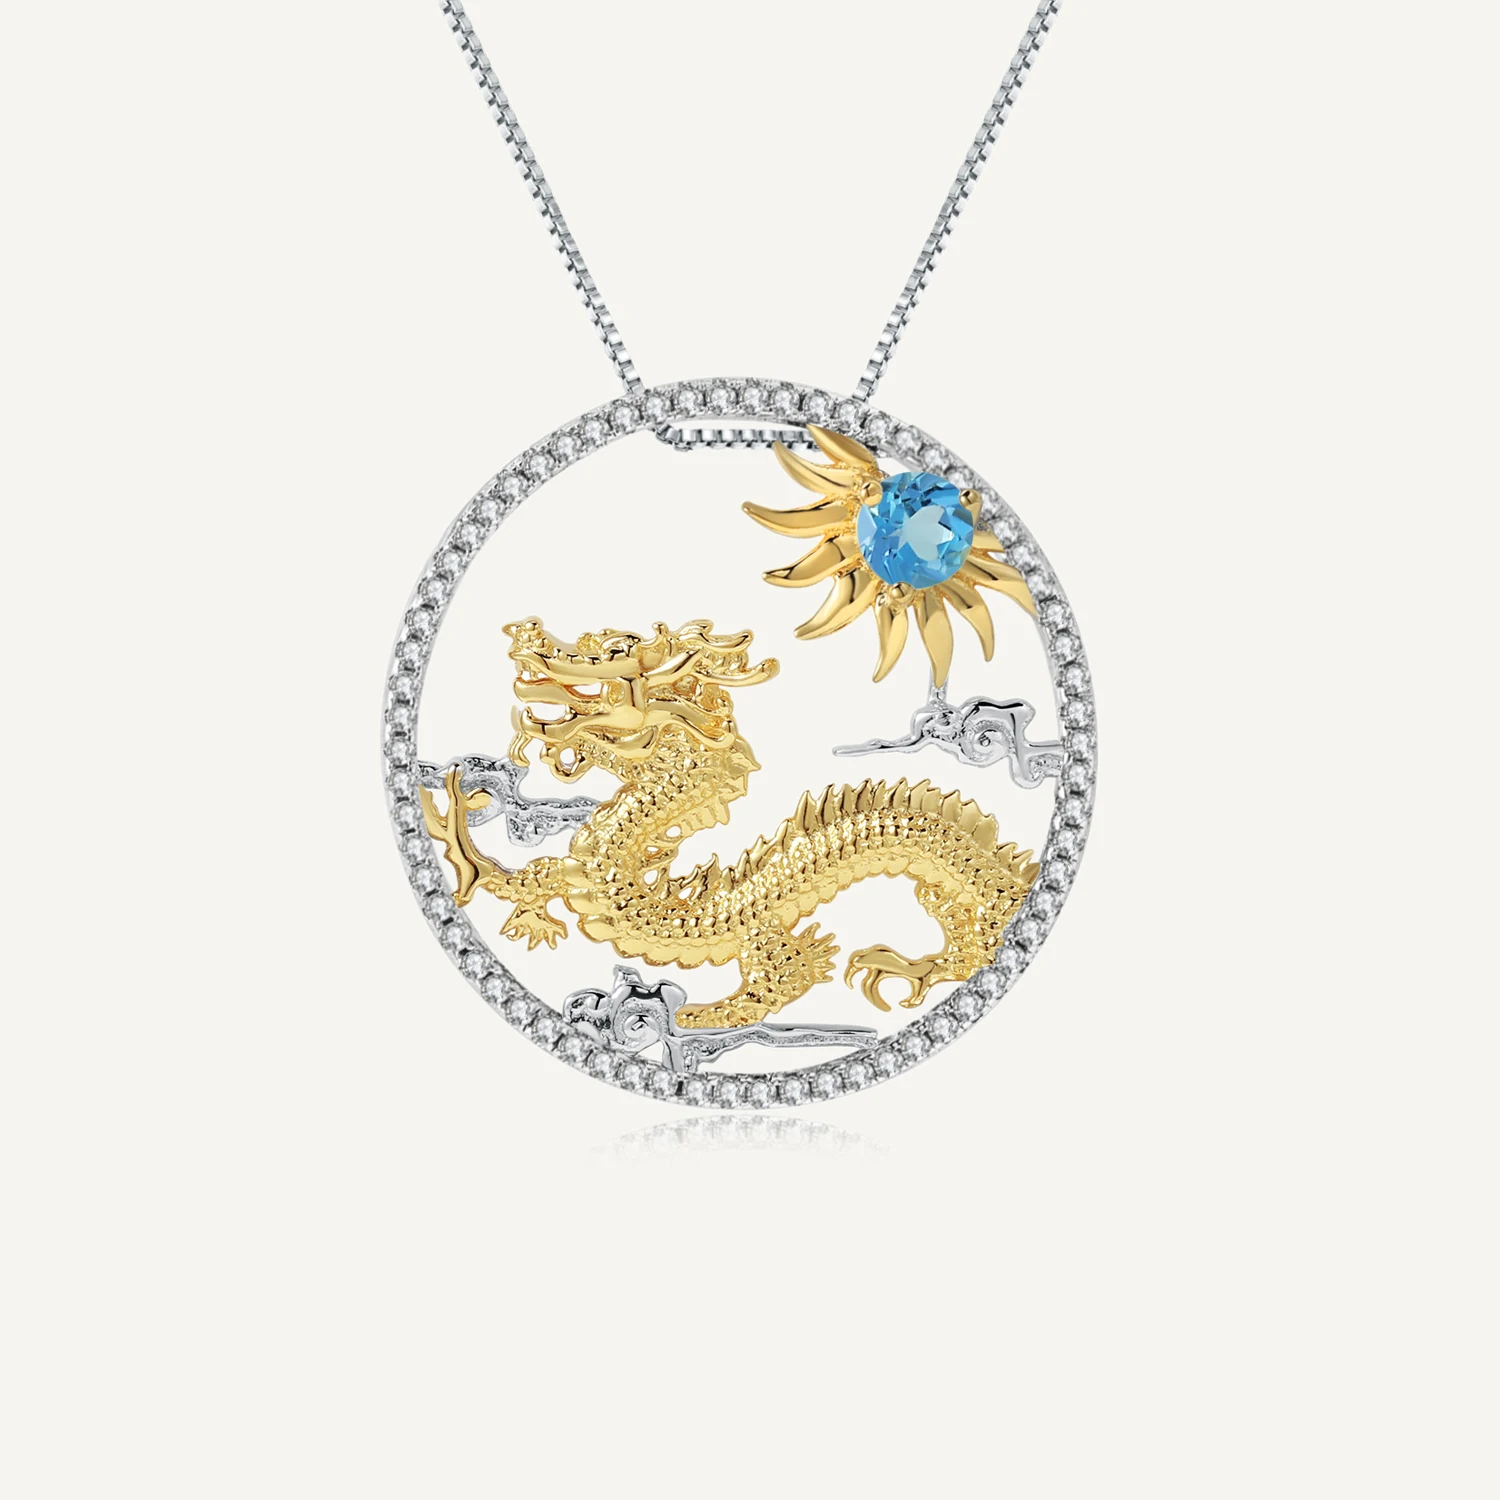 GEM'S BALLET Natural Swiss Blue Topaz Chinese Zodiac Jewelry 925 Sterling Silver Handmade Myth Dragon Pendant Necklace For Women